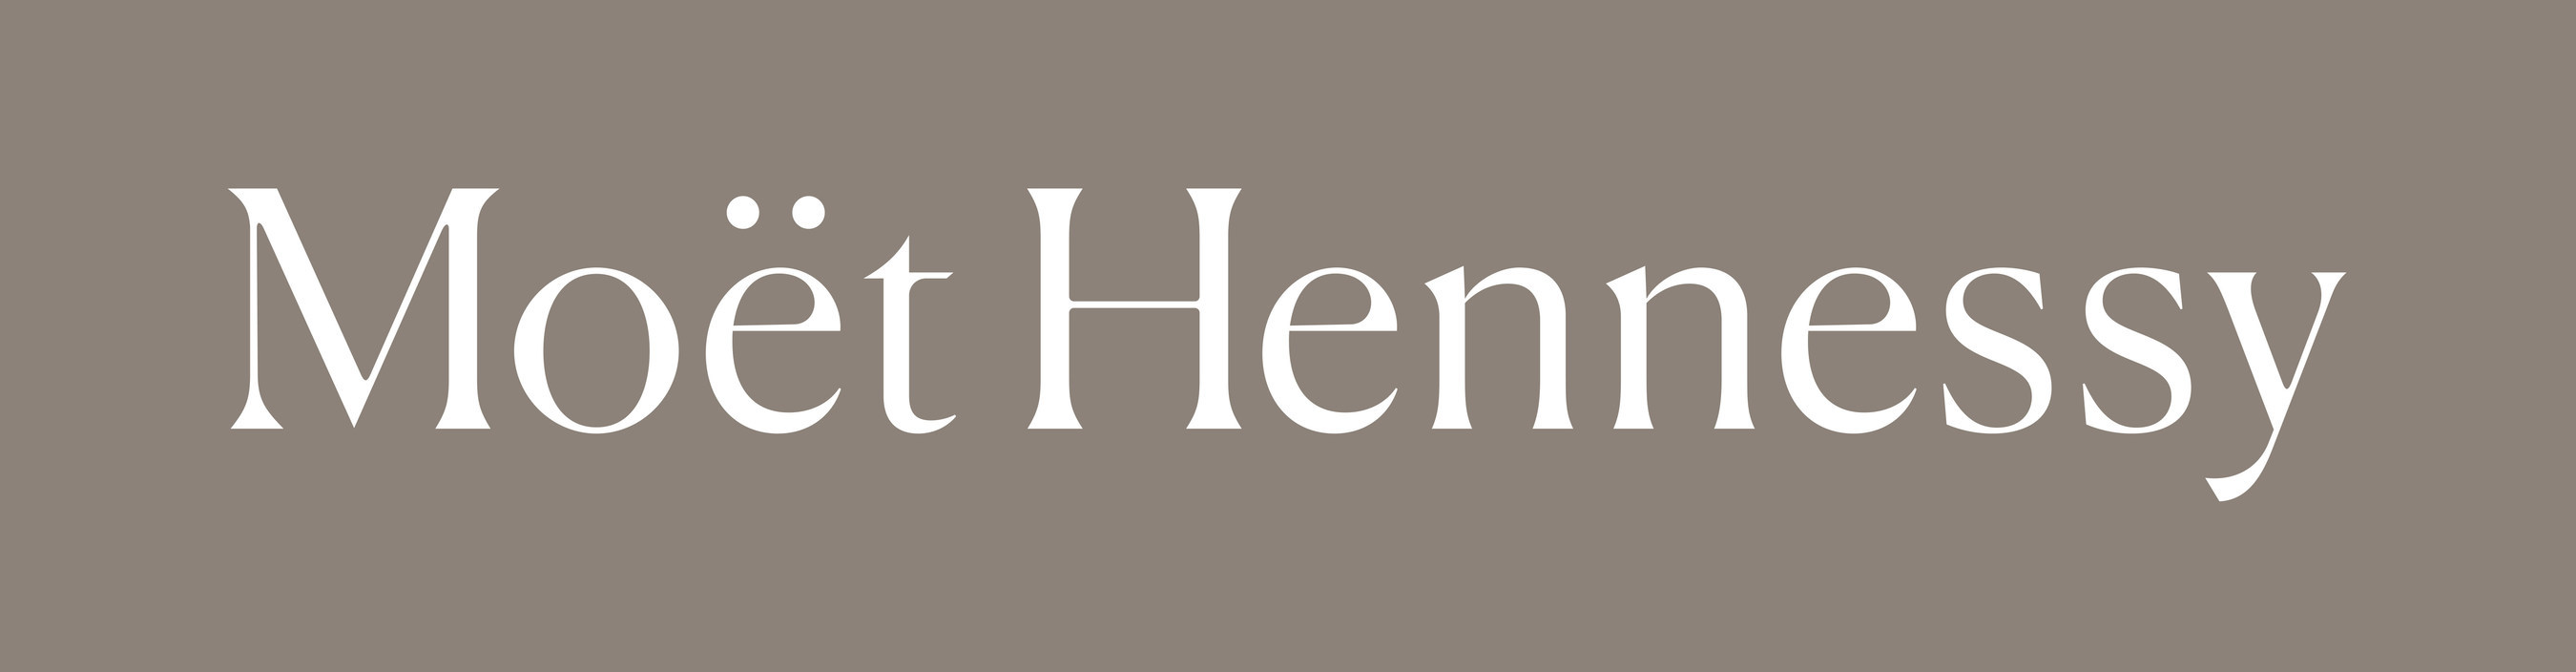 38 Moet Hennessy Logo Images, Stock Photos, 3D objects, & Vectors